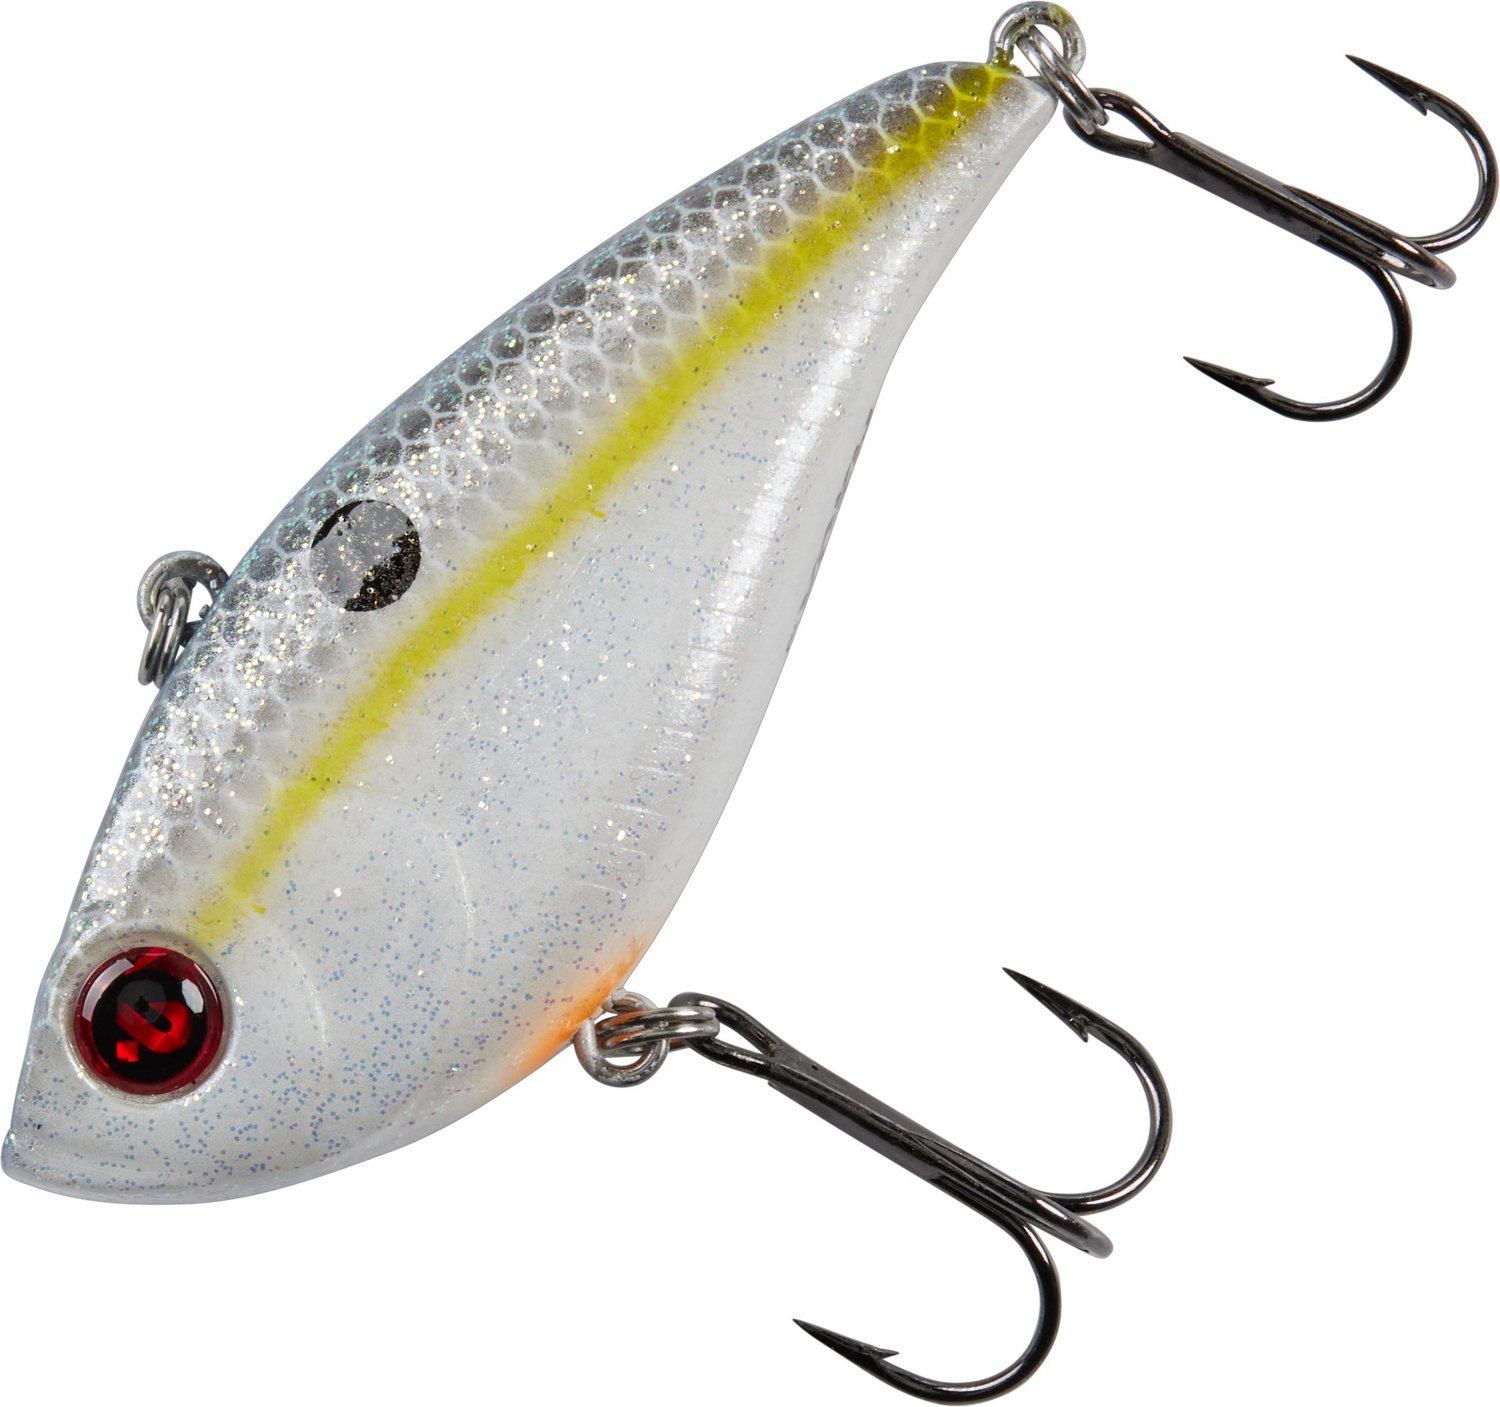 Fishmaster Whole 18 Lure Crankbait: Bass Tackle With 8 Hooks, 3g Weight,  5cm Size Ideal For Insect Attraction And Baiting From Chinastore9527, $7.63